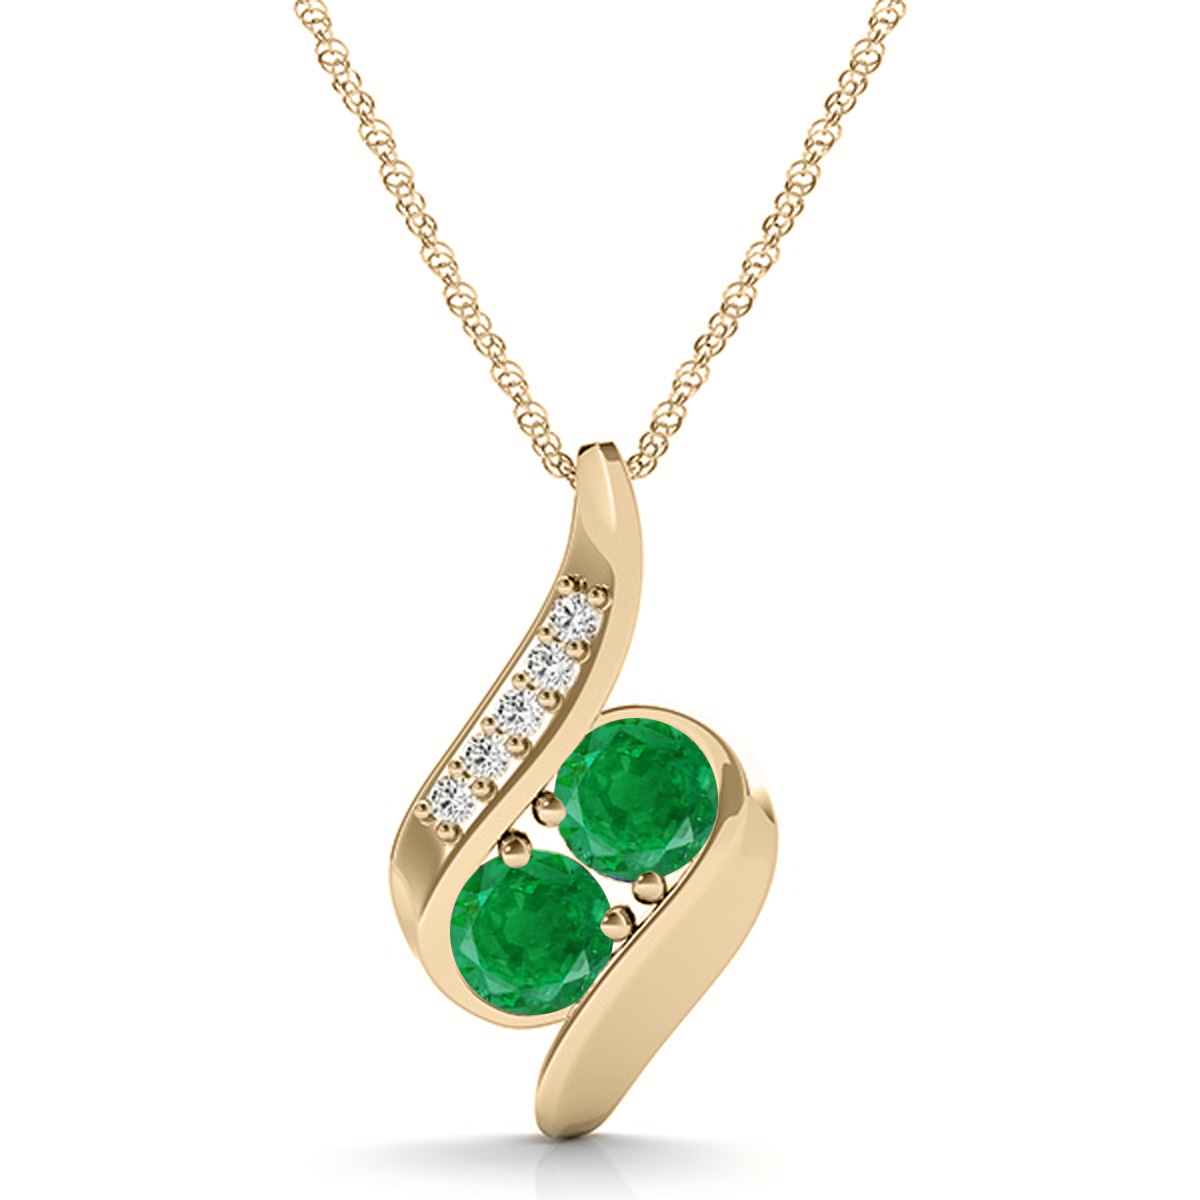 Aone 1Ct Two Emerald Gemstone And White Diamond Pendant With 18" Chain In 14K Yellow Gold